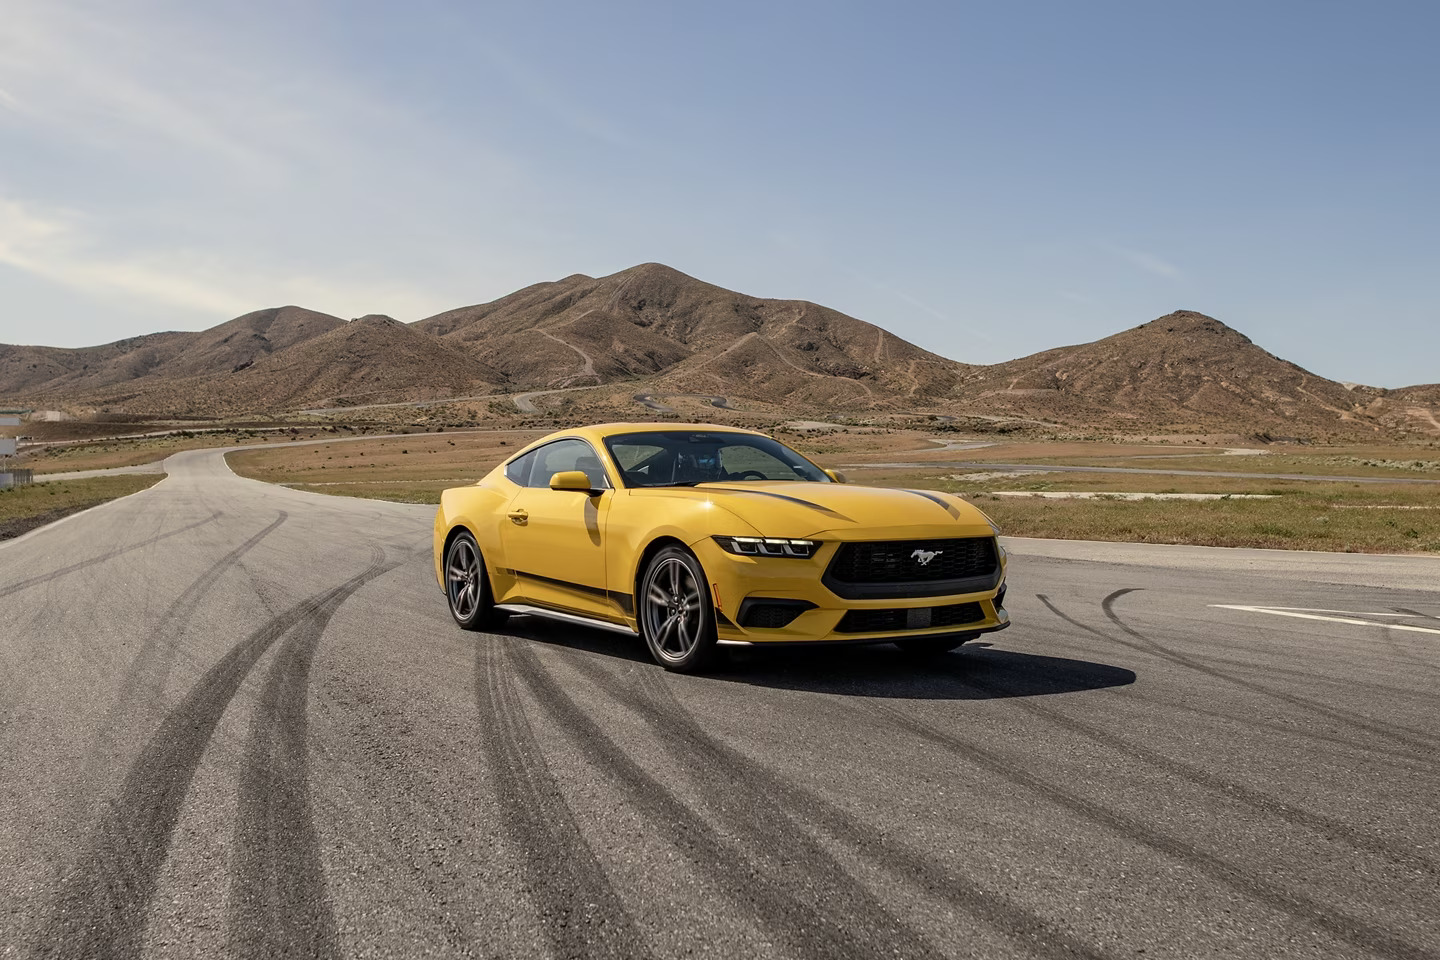 A yellow Ford mustang from Ford dealerships in Jacksonville NC sits on a road with desert hills in the background.